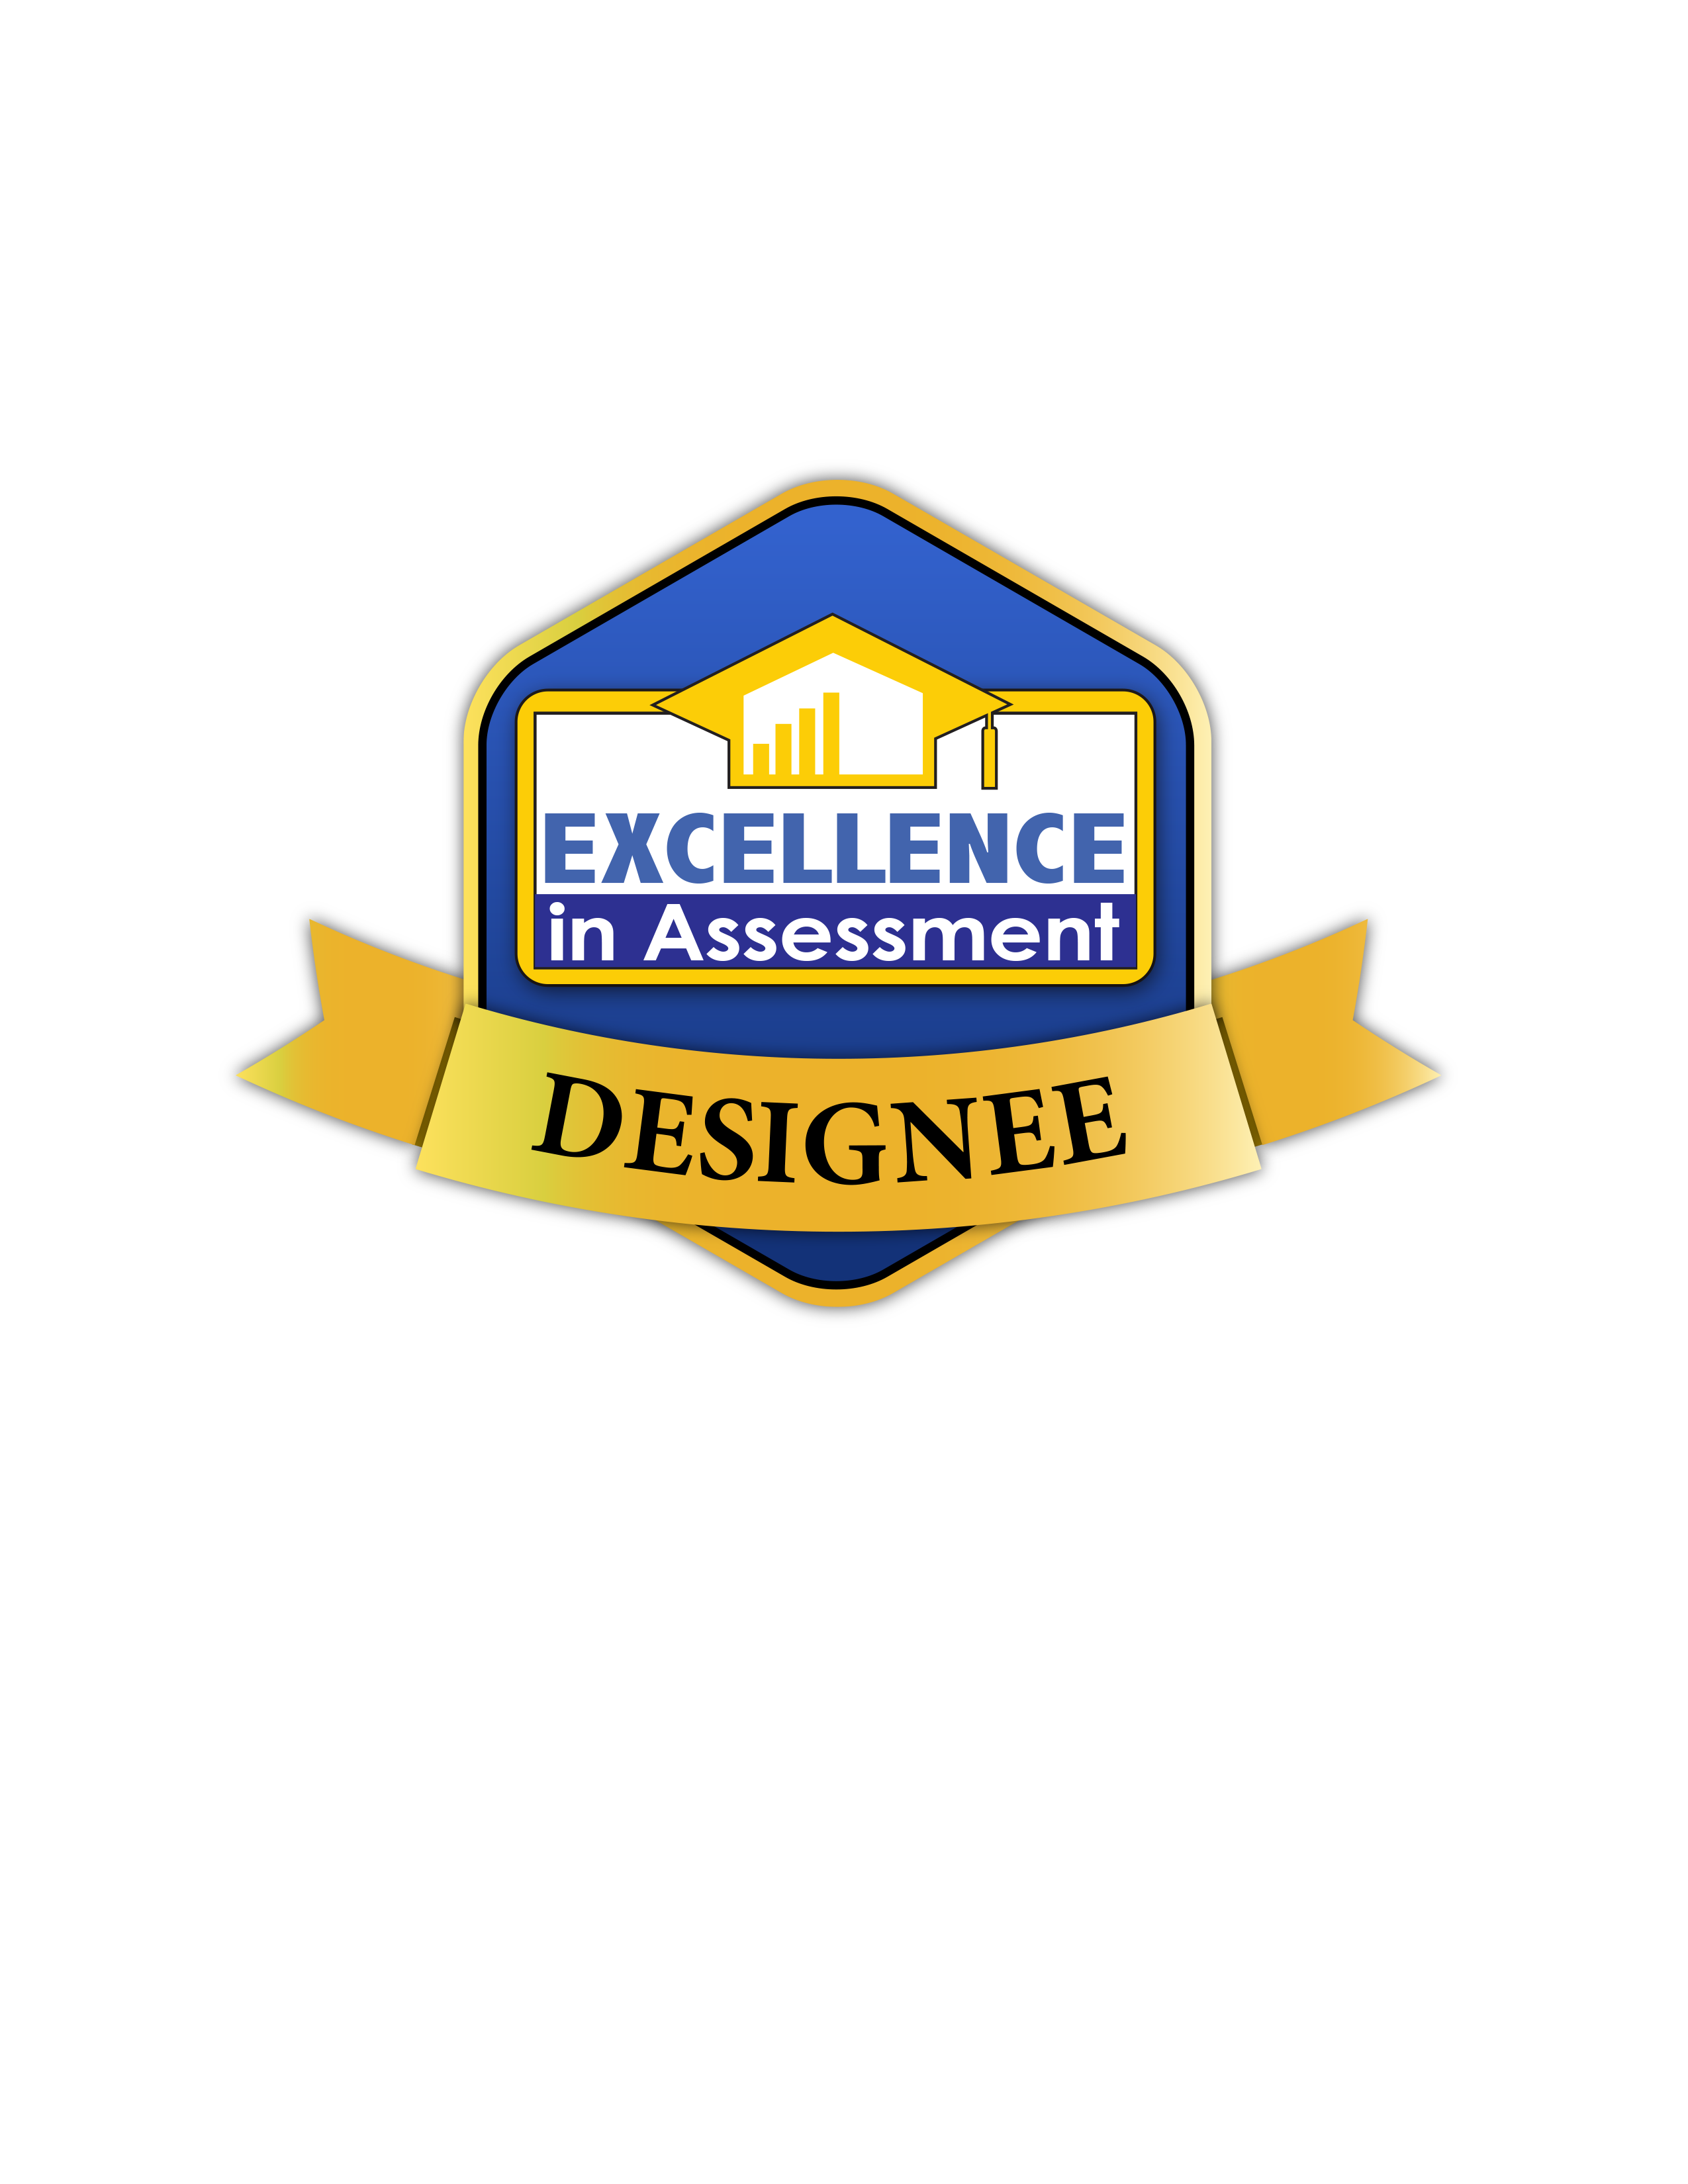 Missouri State is proud to be a 2019 Excellence in Assessment Designee.